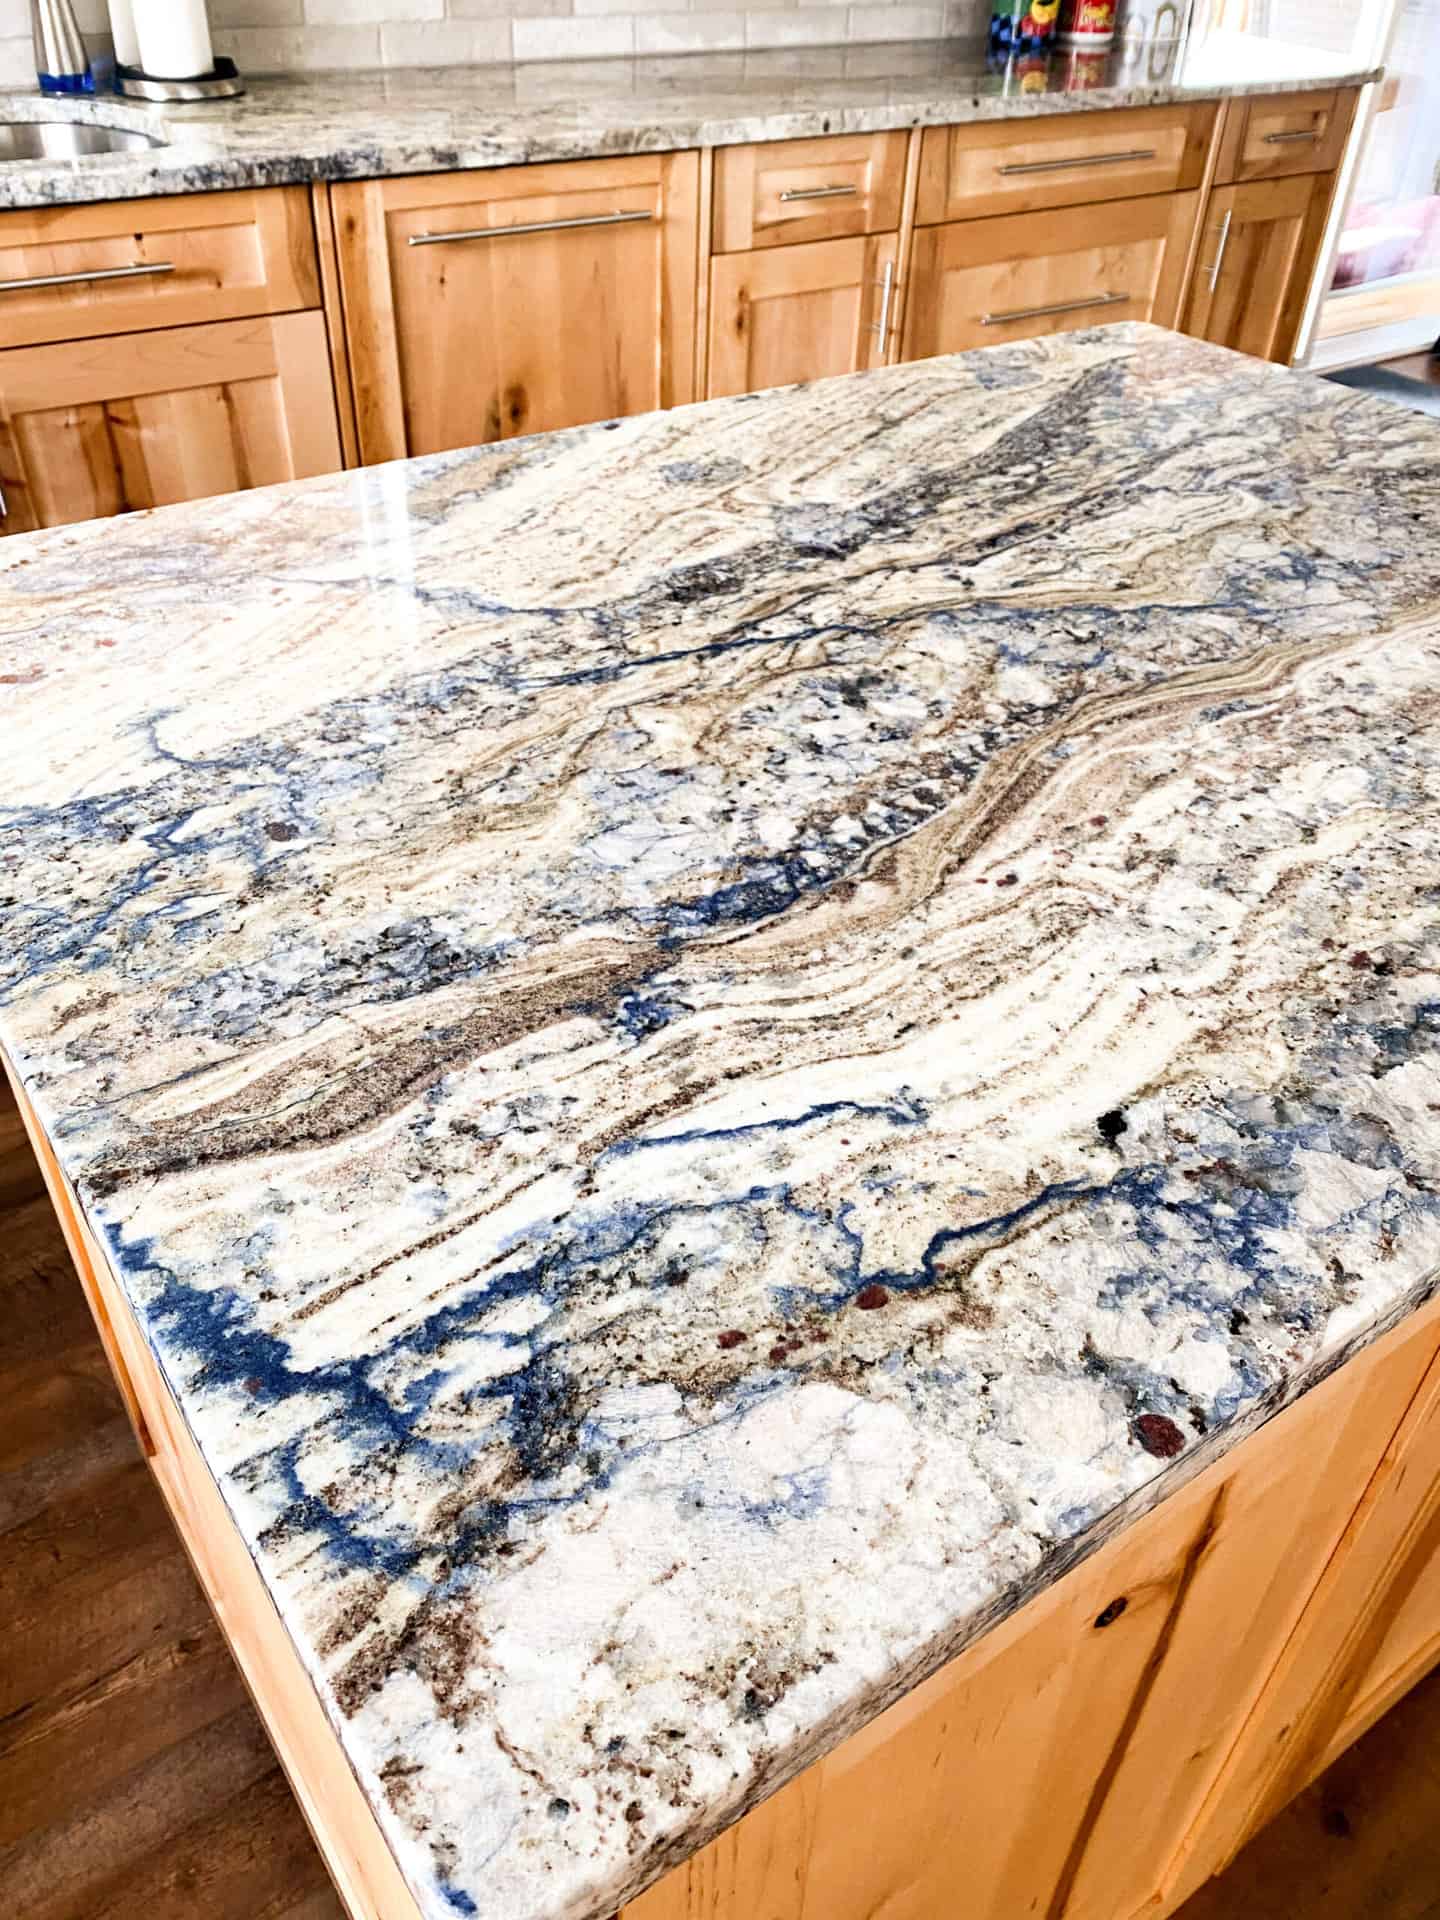 marble counter and wooden cabinets